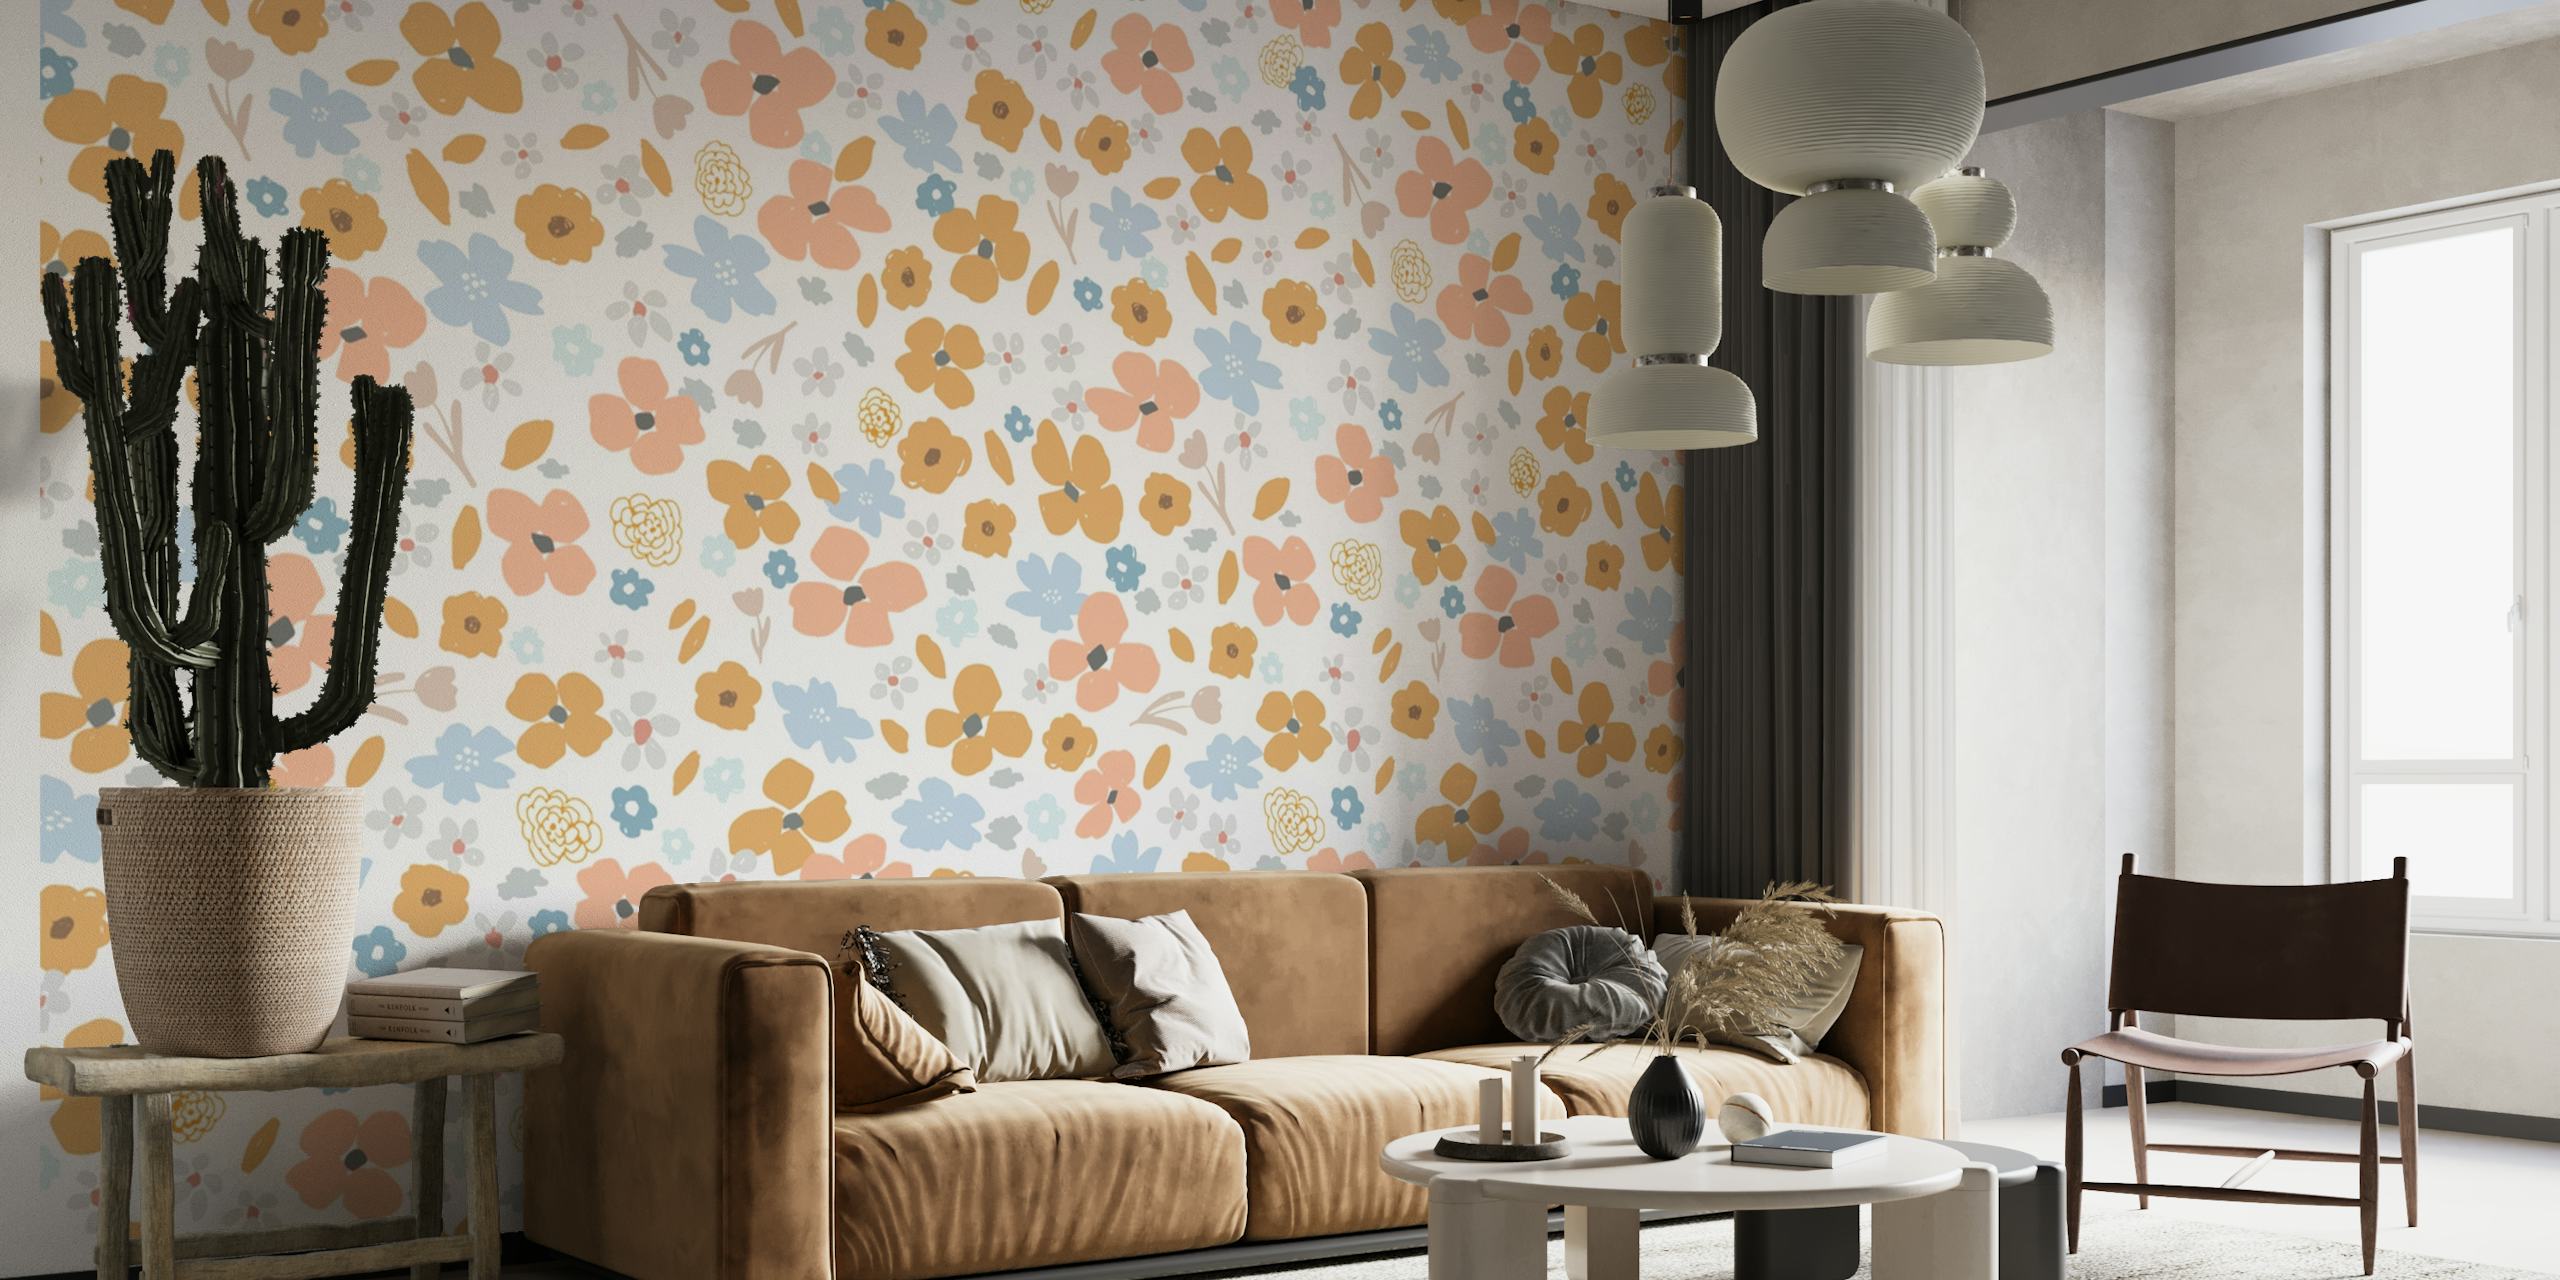 Marie_modern floral pattern featuring mustard, blush, and periwinkle flowers on an off-white background for wall mural